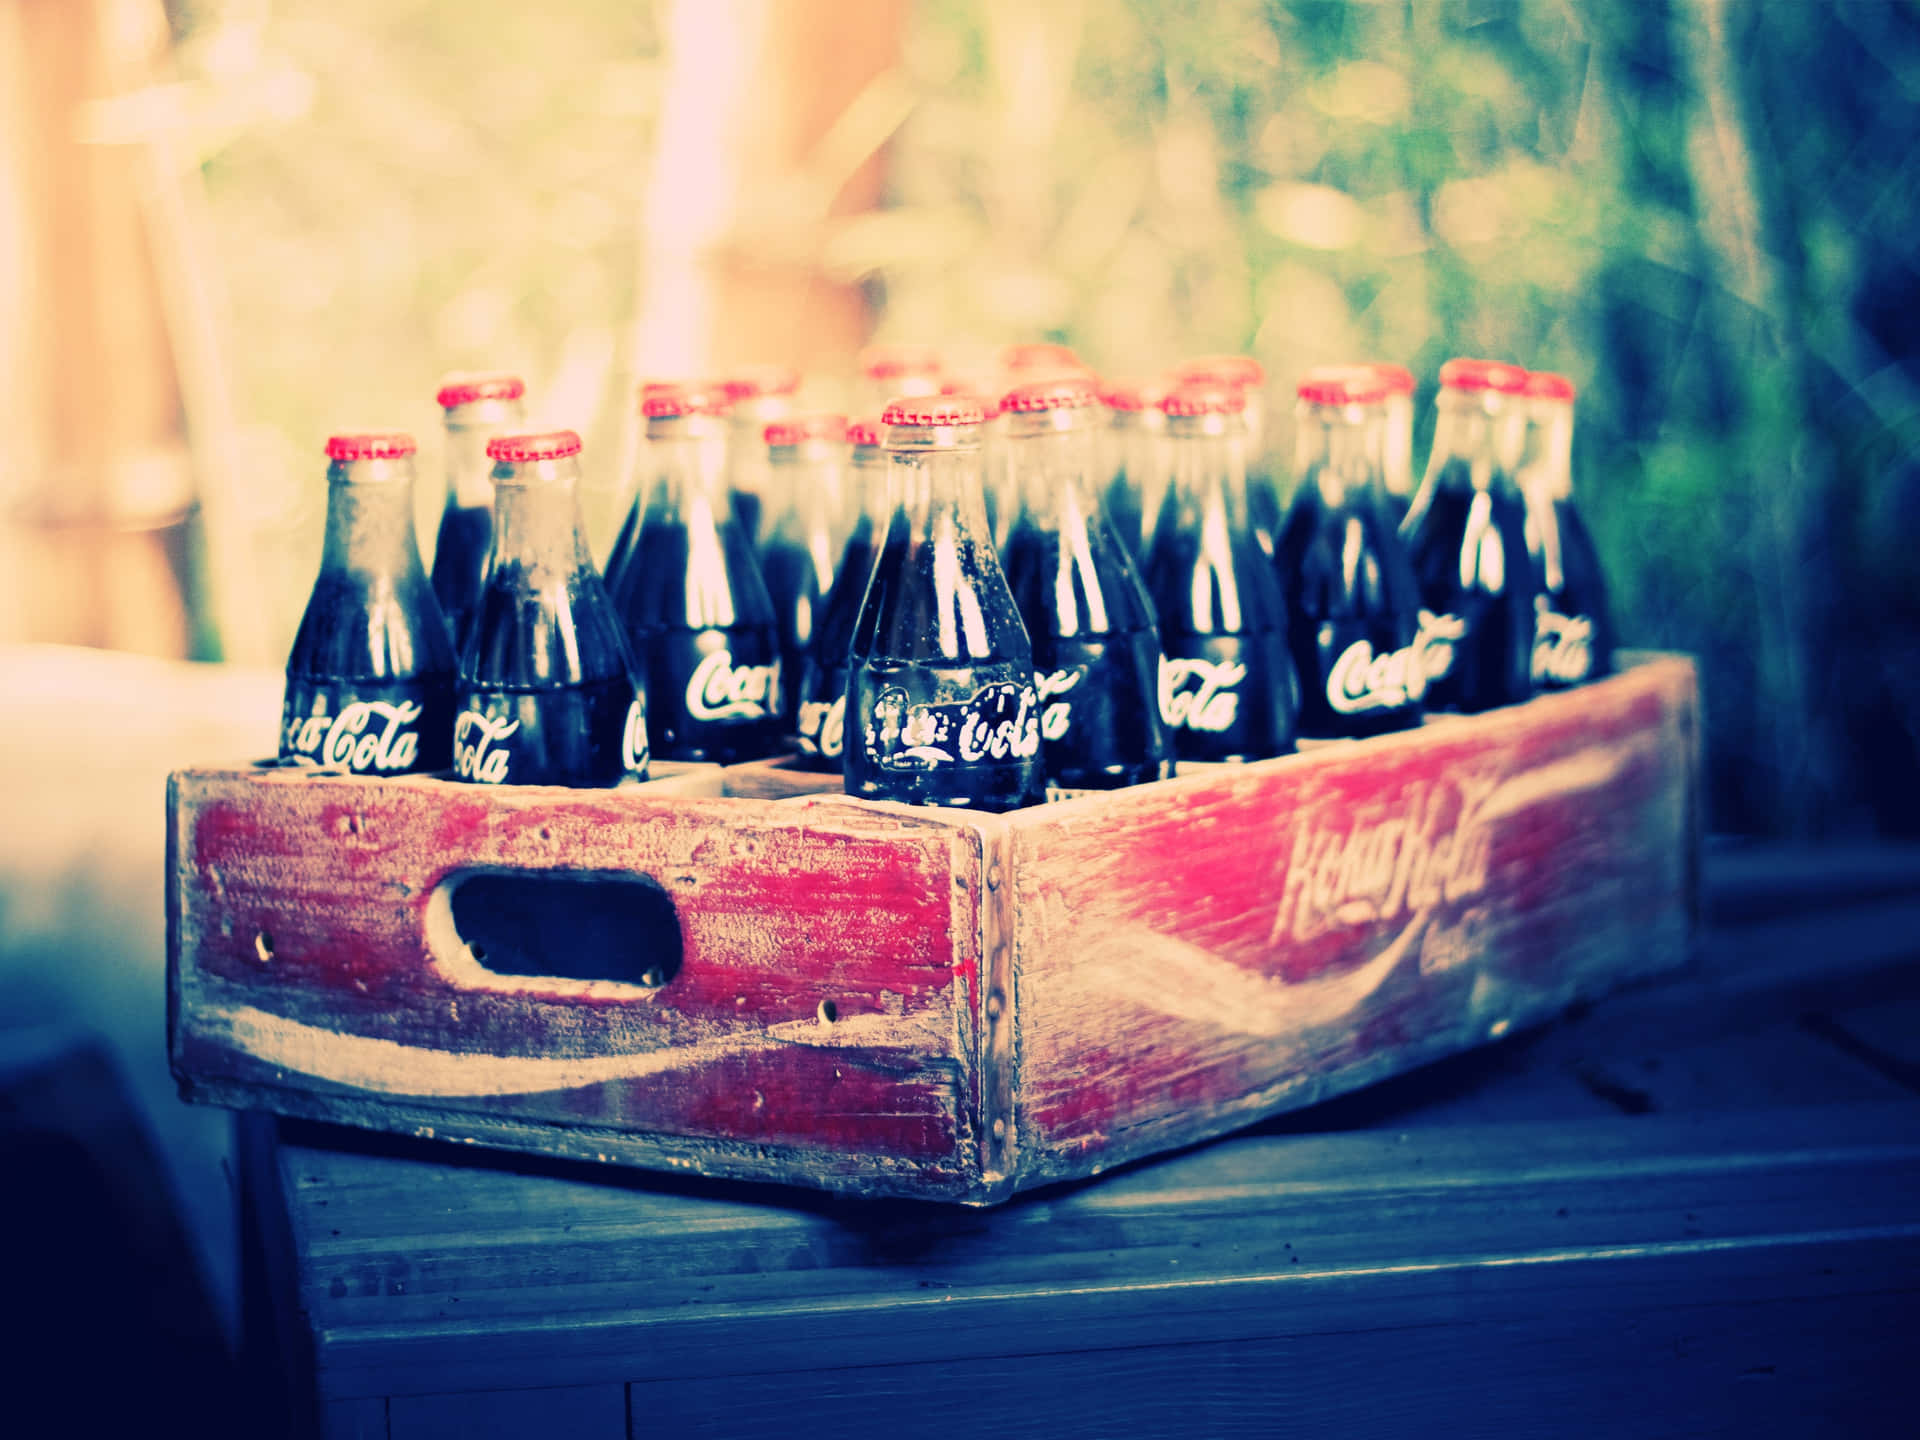 A Wooden Box With Coke Bottles